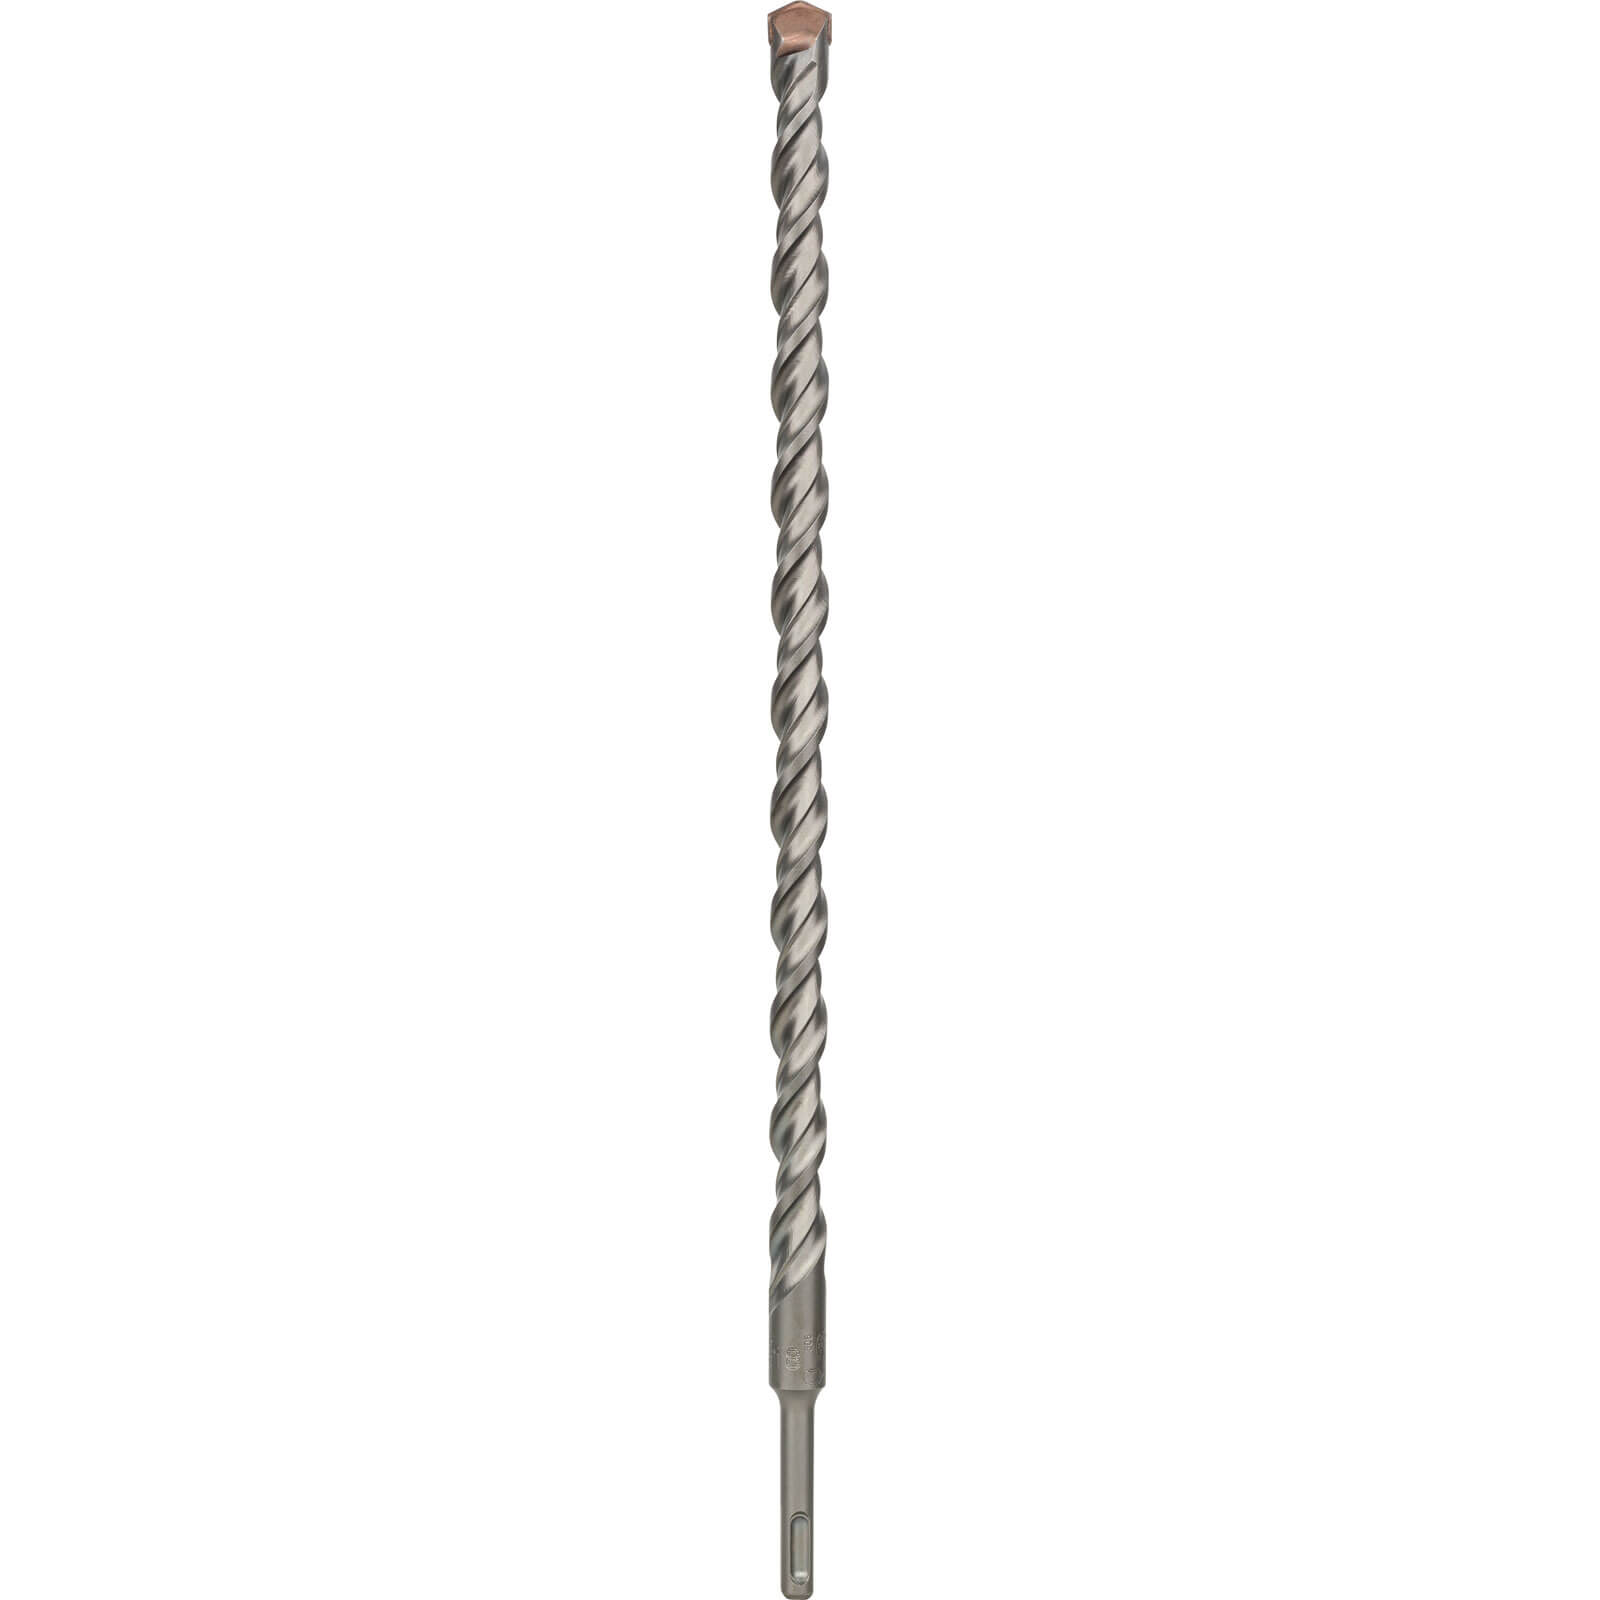 Image of Bosch Series 3 SDS Plus Masonry Drill Bit 18mm 450mm Pack of 1